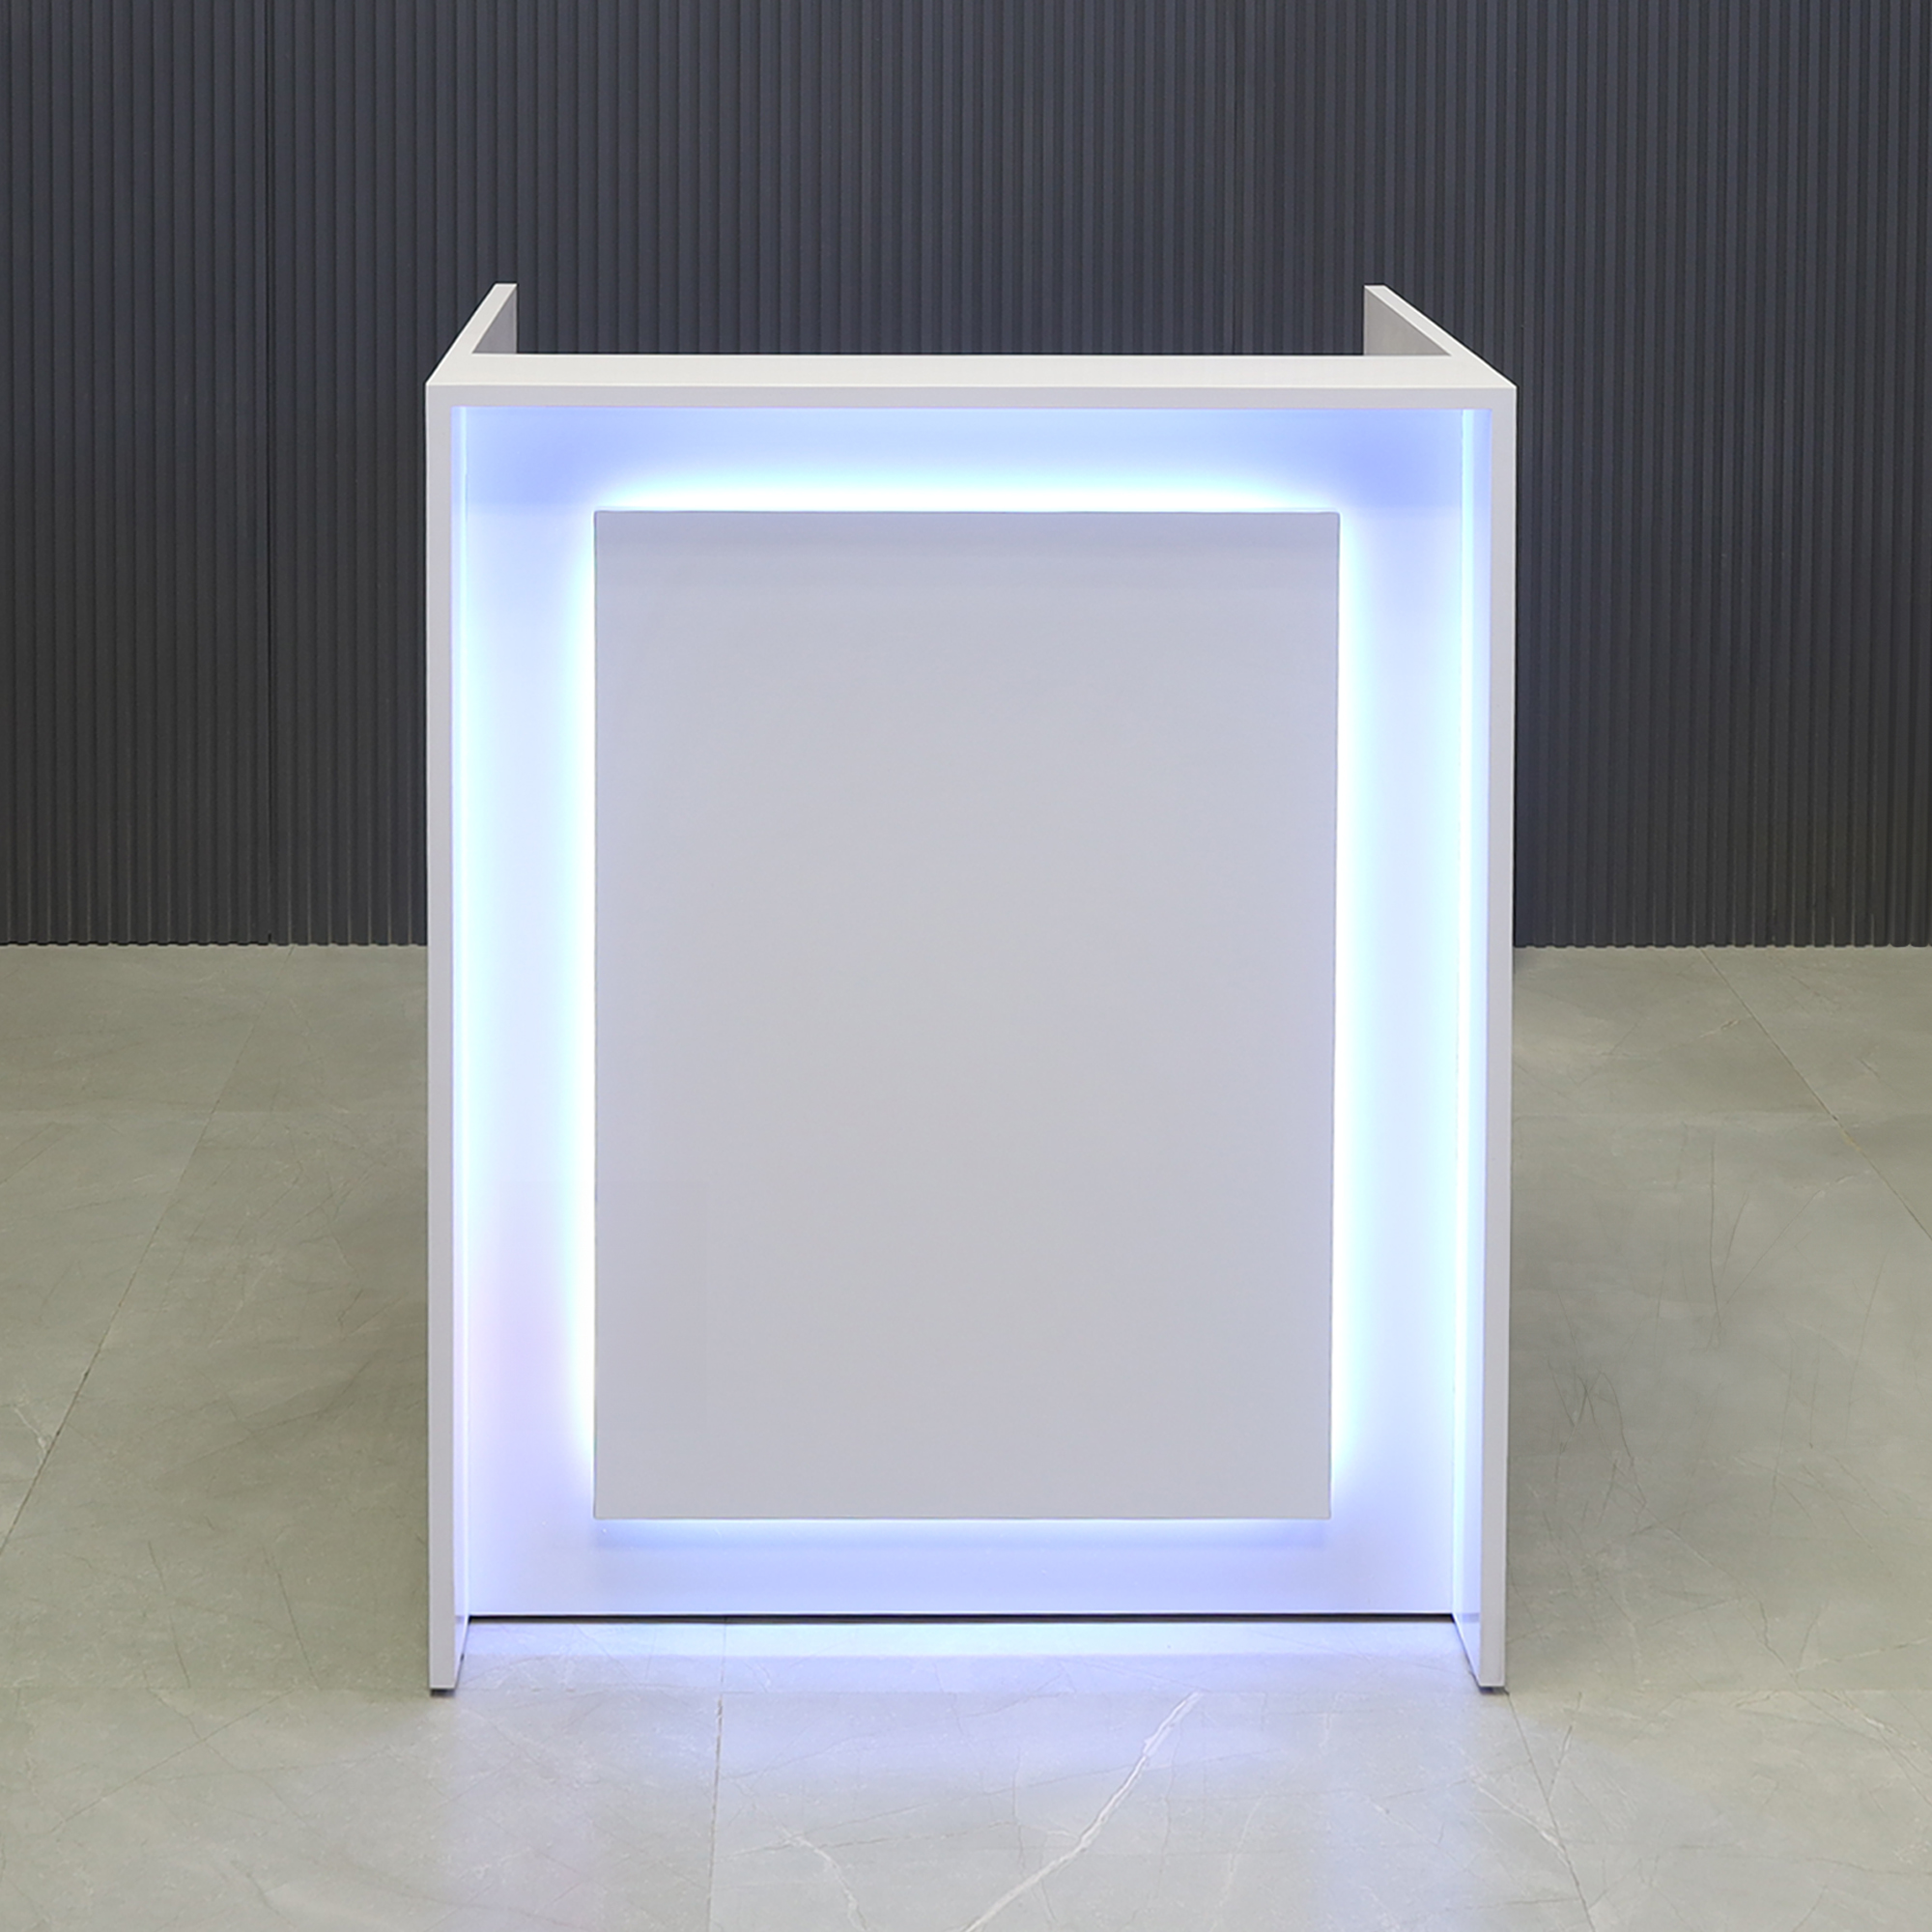 32-inch New York U-Shape Podium & Host Custom Desk in white gloss laminate desk and front panel, with multi-colored LED shown, here.